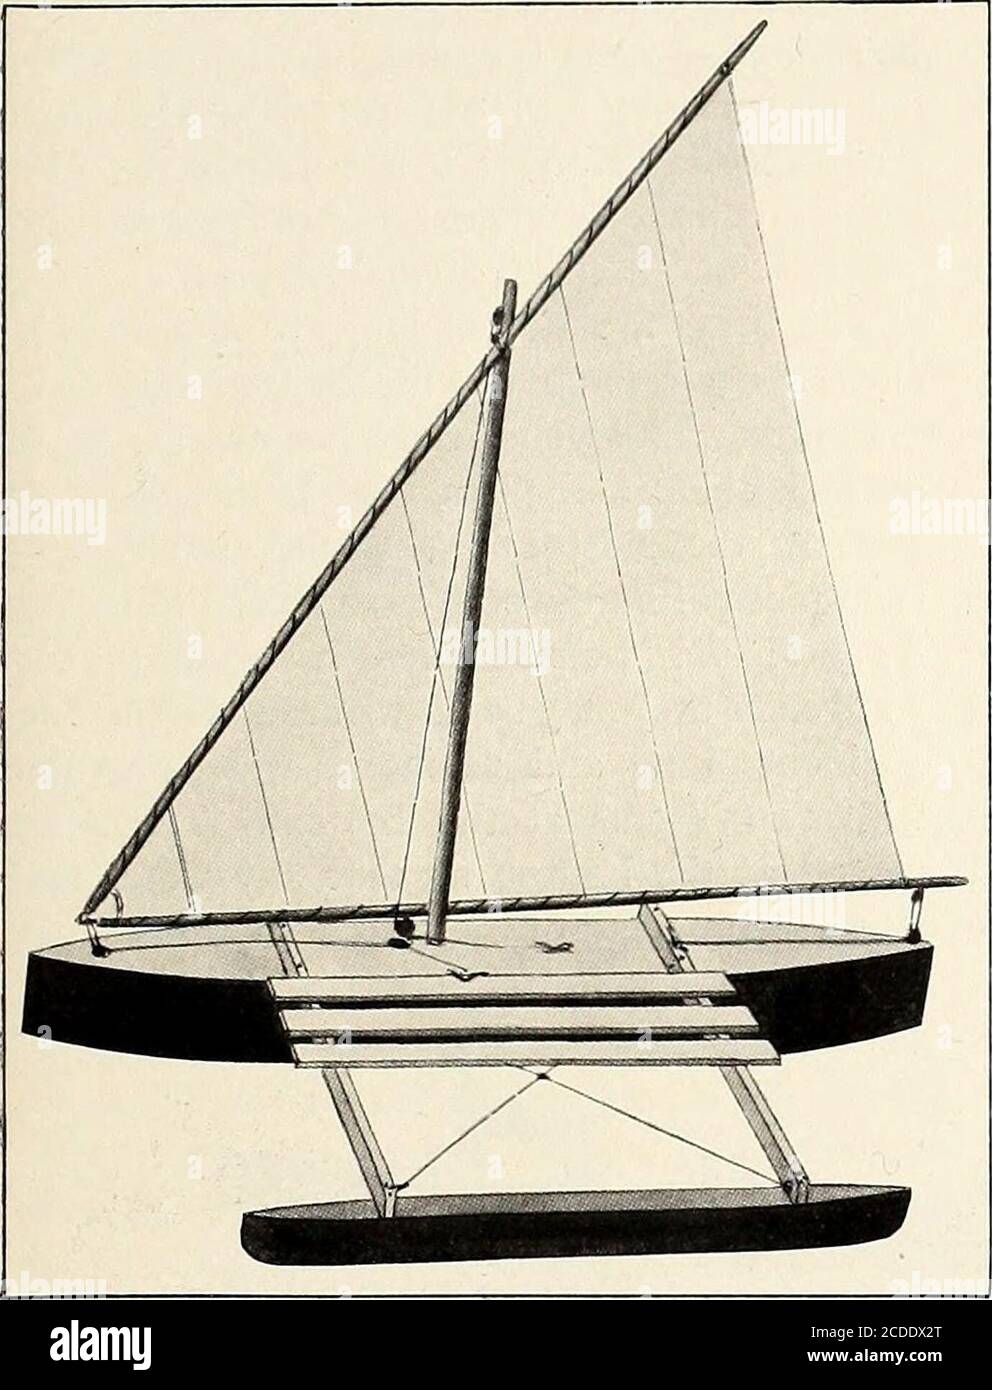 . St. Nicholas [serial] . FIG. 3. DETAILS OF A SAILING-SHARPY. line of the boats sides, butmeasure about 28 inches.The decking is donewith narrow strips ofpine, cypress, or cedar,y2 inches wide and ^of an inch in thickness.The canvas should betacked down over theouter edge of the boatand the inner edge ofthe cockpit. A gunwalestrip an inch square isto be nailed along thetop edge on both sidesof the boat, and an inchbelow the top nail fen-der-rails along each side.Arrange a combing inplace that will project 4inches above the deck,and attach the boardsfast to the inner side of theribs with scre Stock Photo